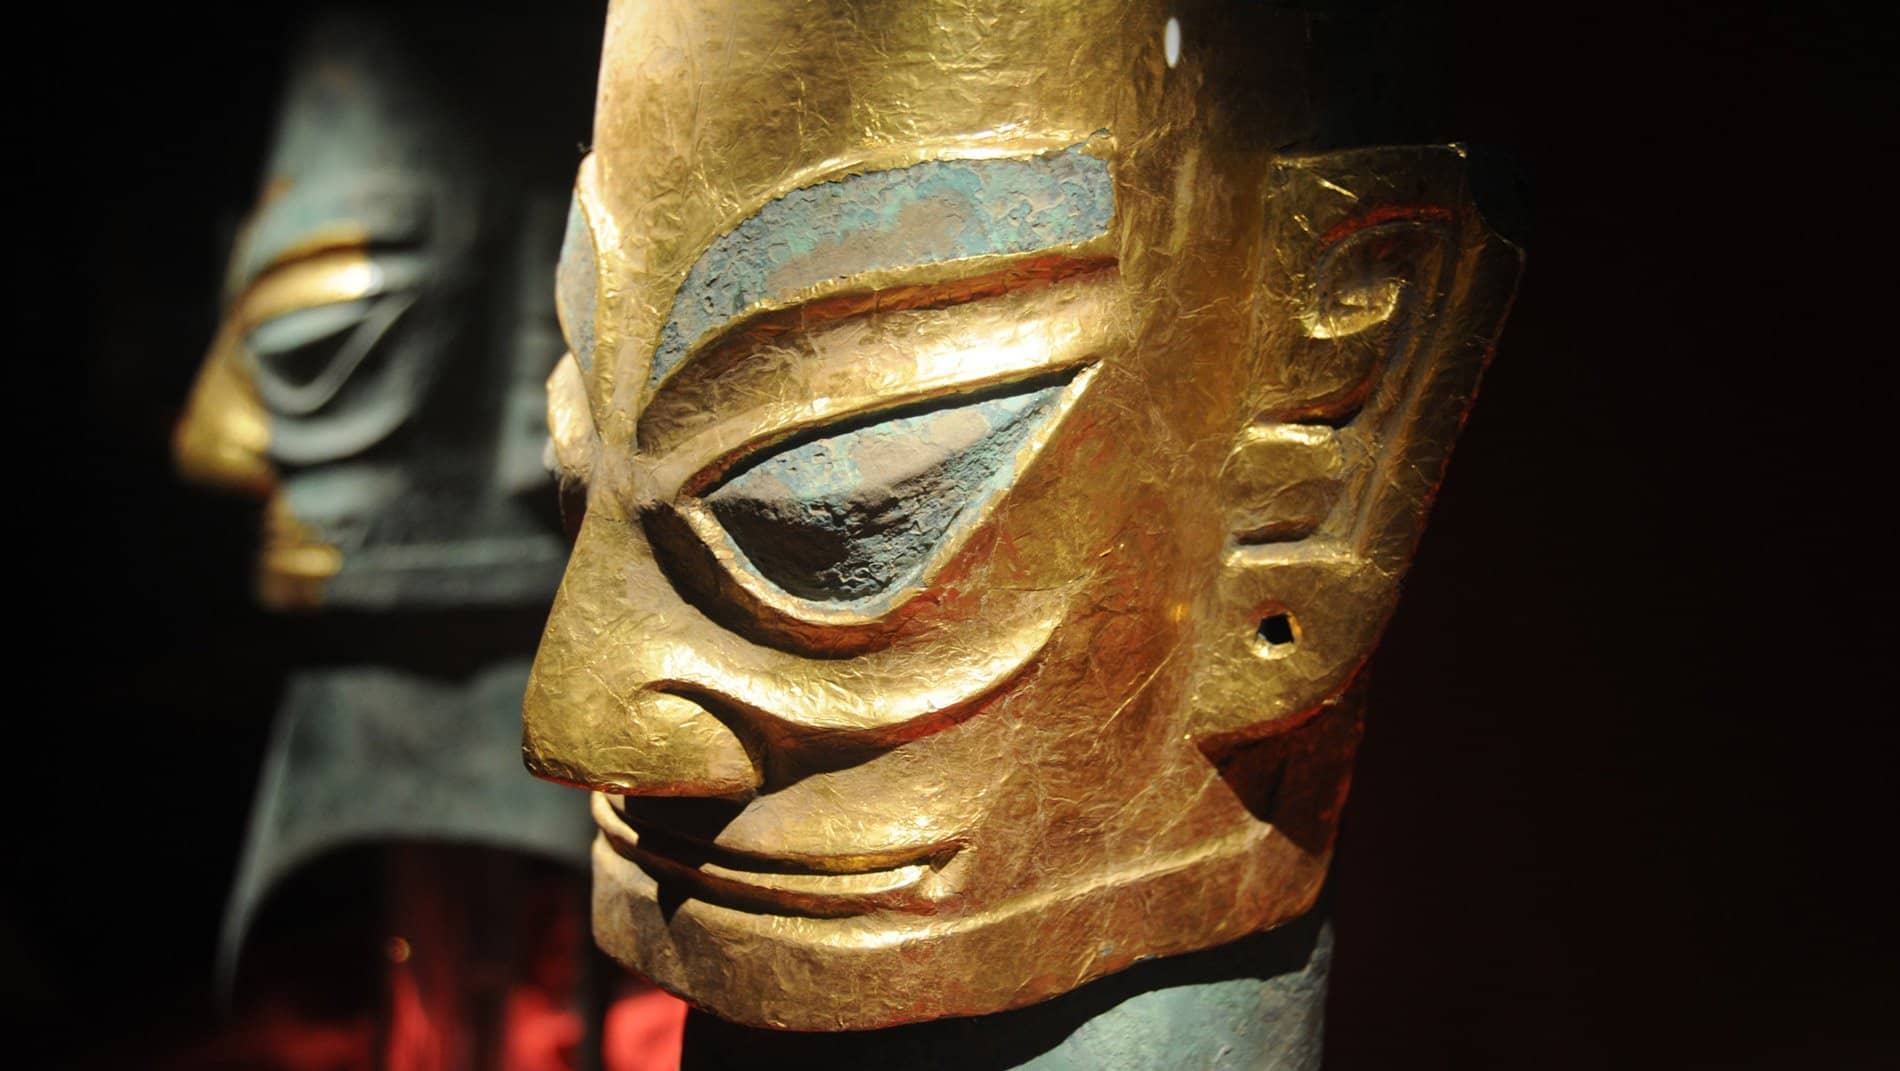 Sanxingdui~Excavated in 1986, the burial pits at Sanxingdui disgorged an amazing treasure trove of golden scepters, gold masks from the size of your pinky to the width of a table and 20 feet tall bronze trees of life; all about three thousand years old.